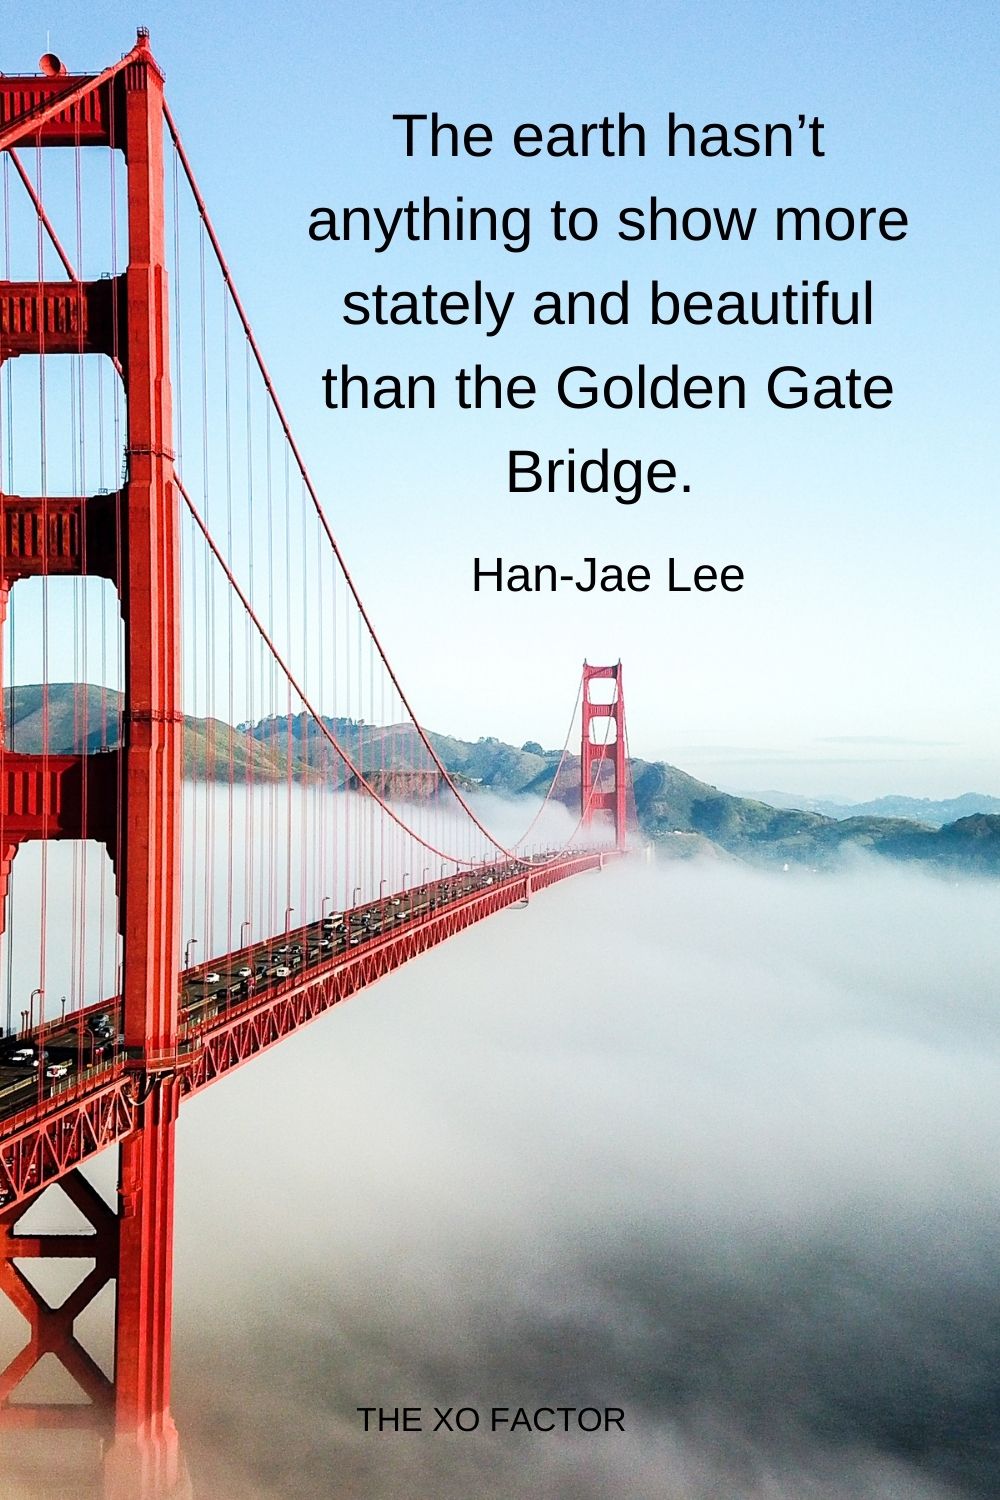 The earth hasn’t anything to show more stately and beautiful than the Golden Gate Bridge.  Han-Jae Lee